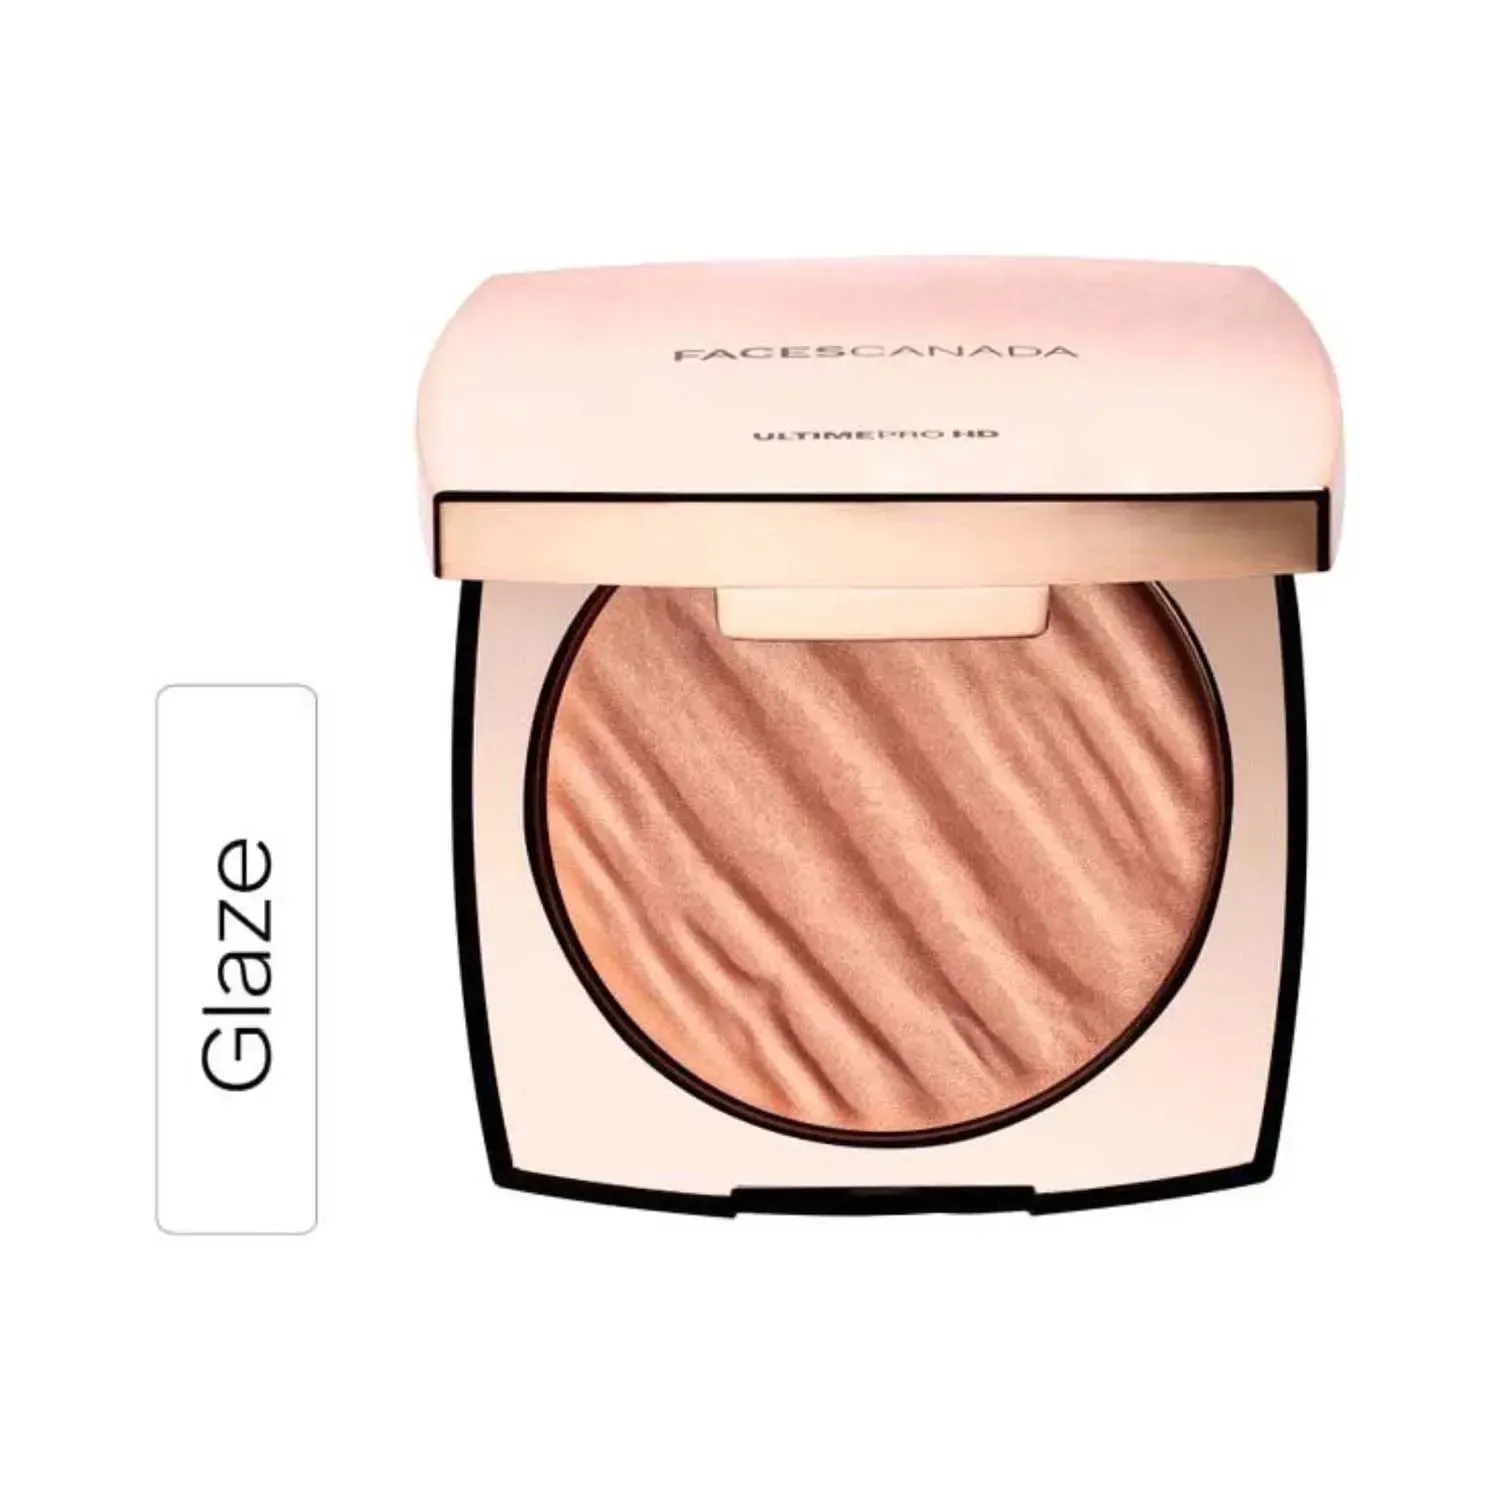 Faces Canada | Faces Canada Ultime Pro HD All That Glow Highlighter - 02 Glaze (10.5g)